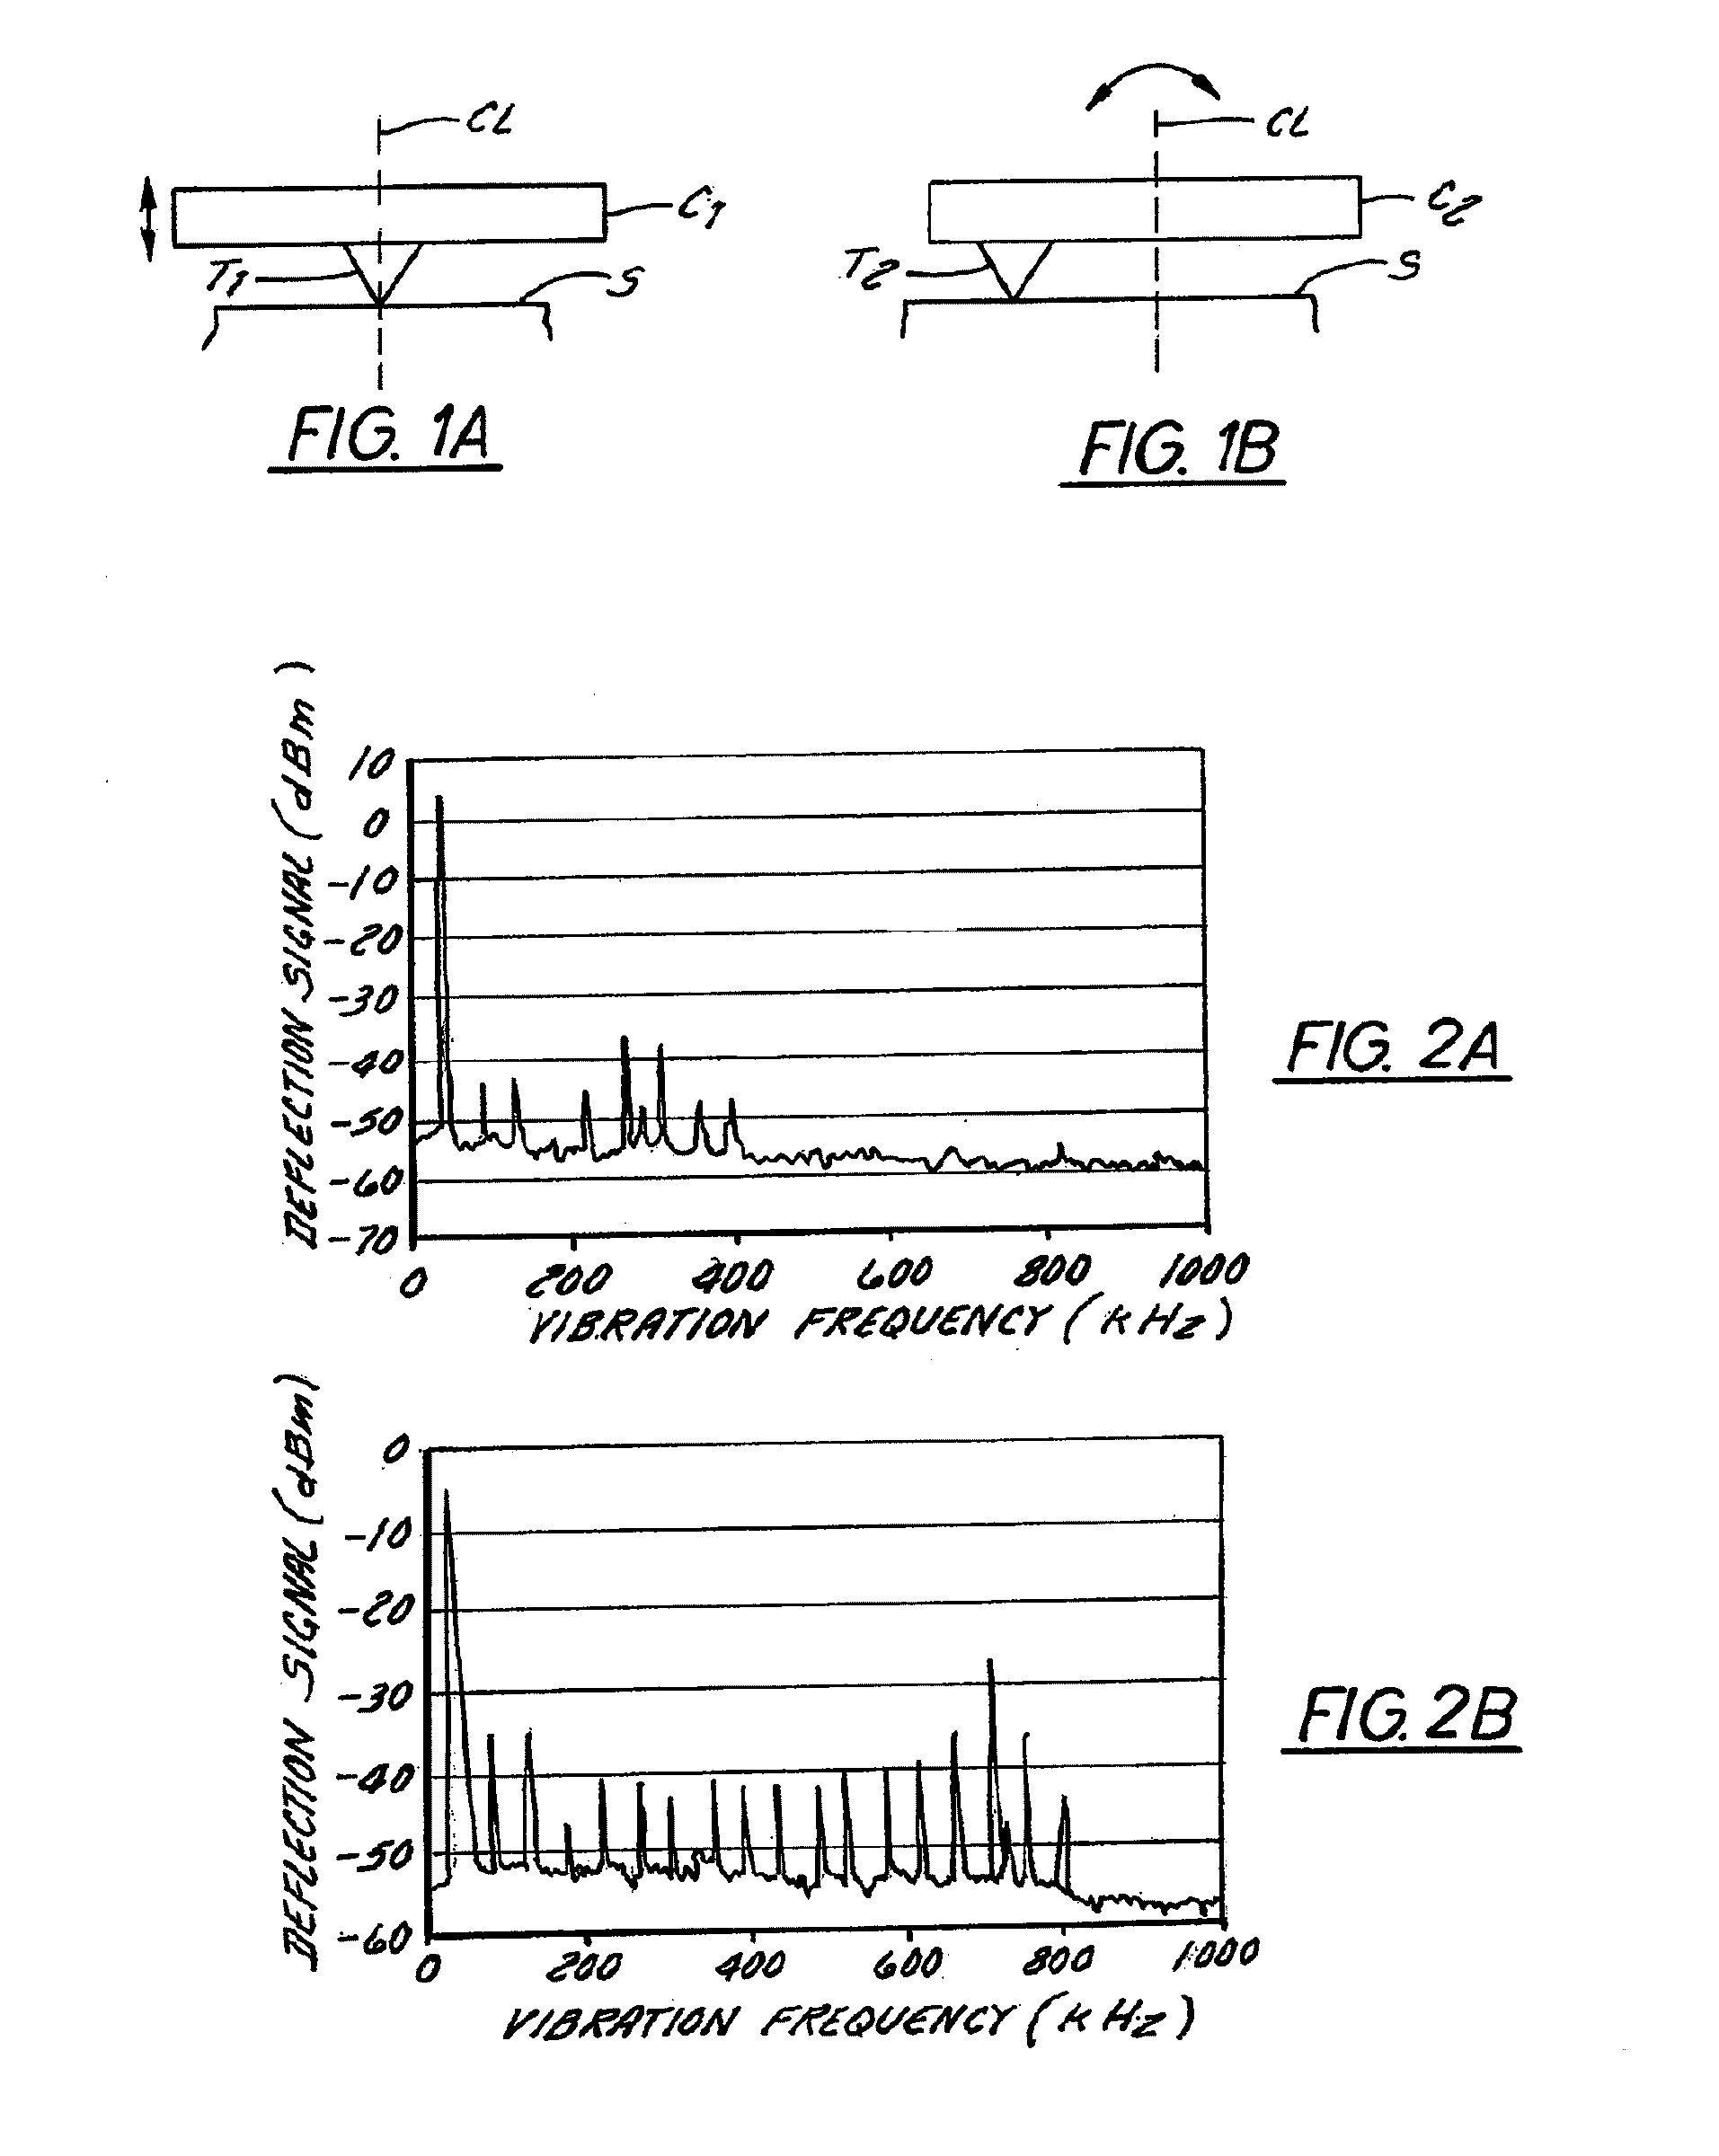 Method and apparatus for obtaining material property information of a heterogeneous sample using harmonic resonance imaging